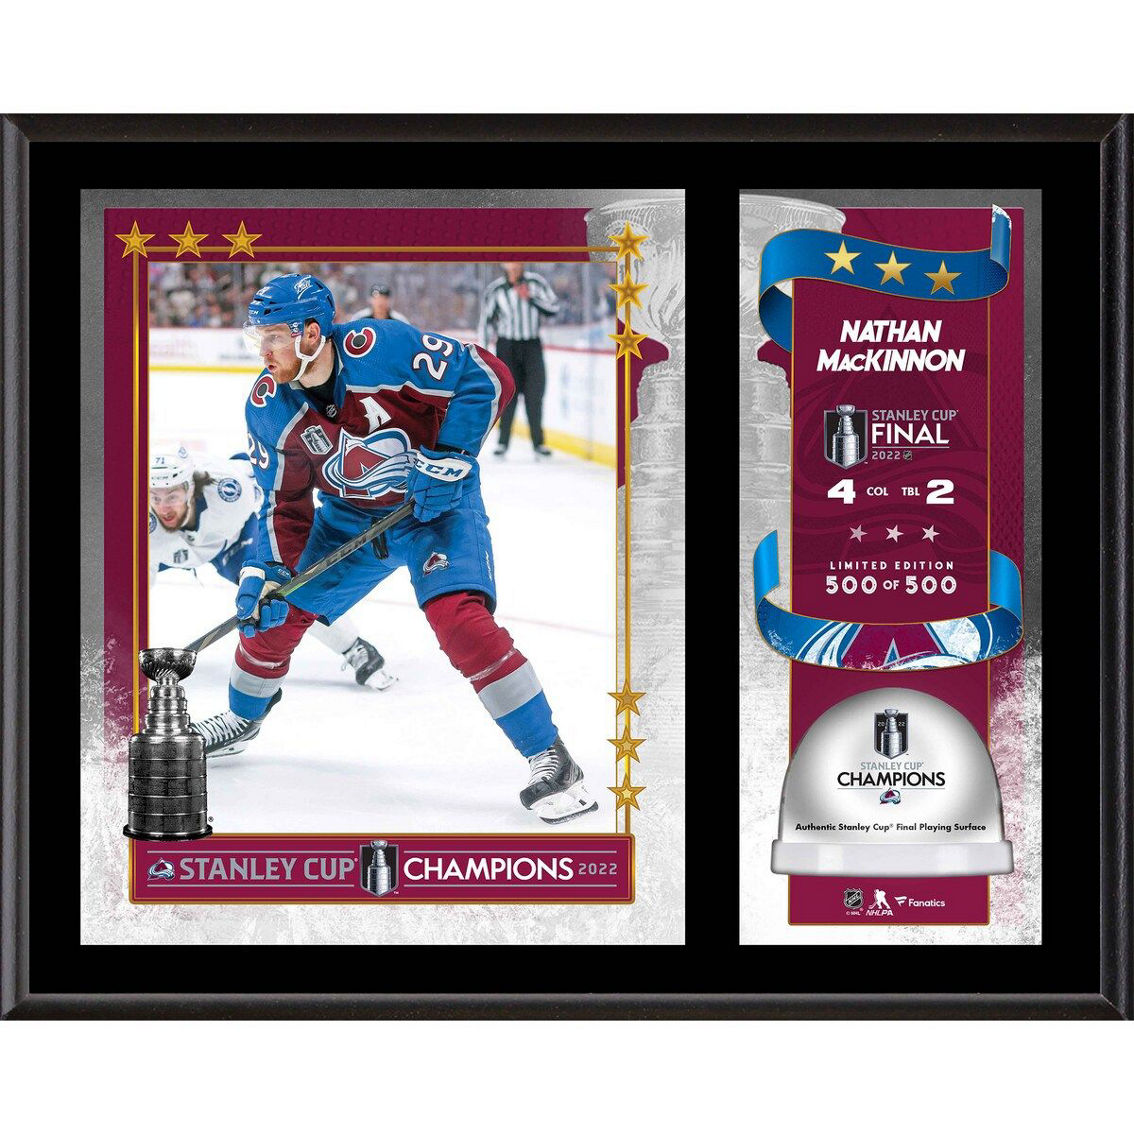 Fanatics Authentic Nathan MacKinnon Colorado Avalanche 2022 Stanley Cup s 12'' x 15'' Sublimated Plaque with Game-Used Ice from the 2022 Stanley Cup Final - Limited Edition of 500 - Image 2 of 2